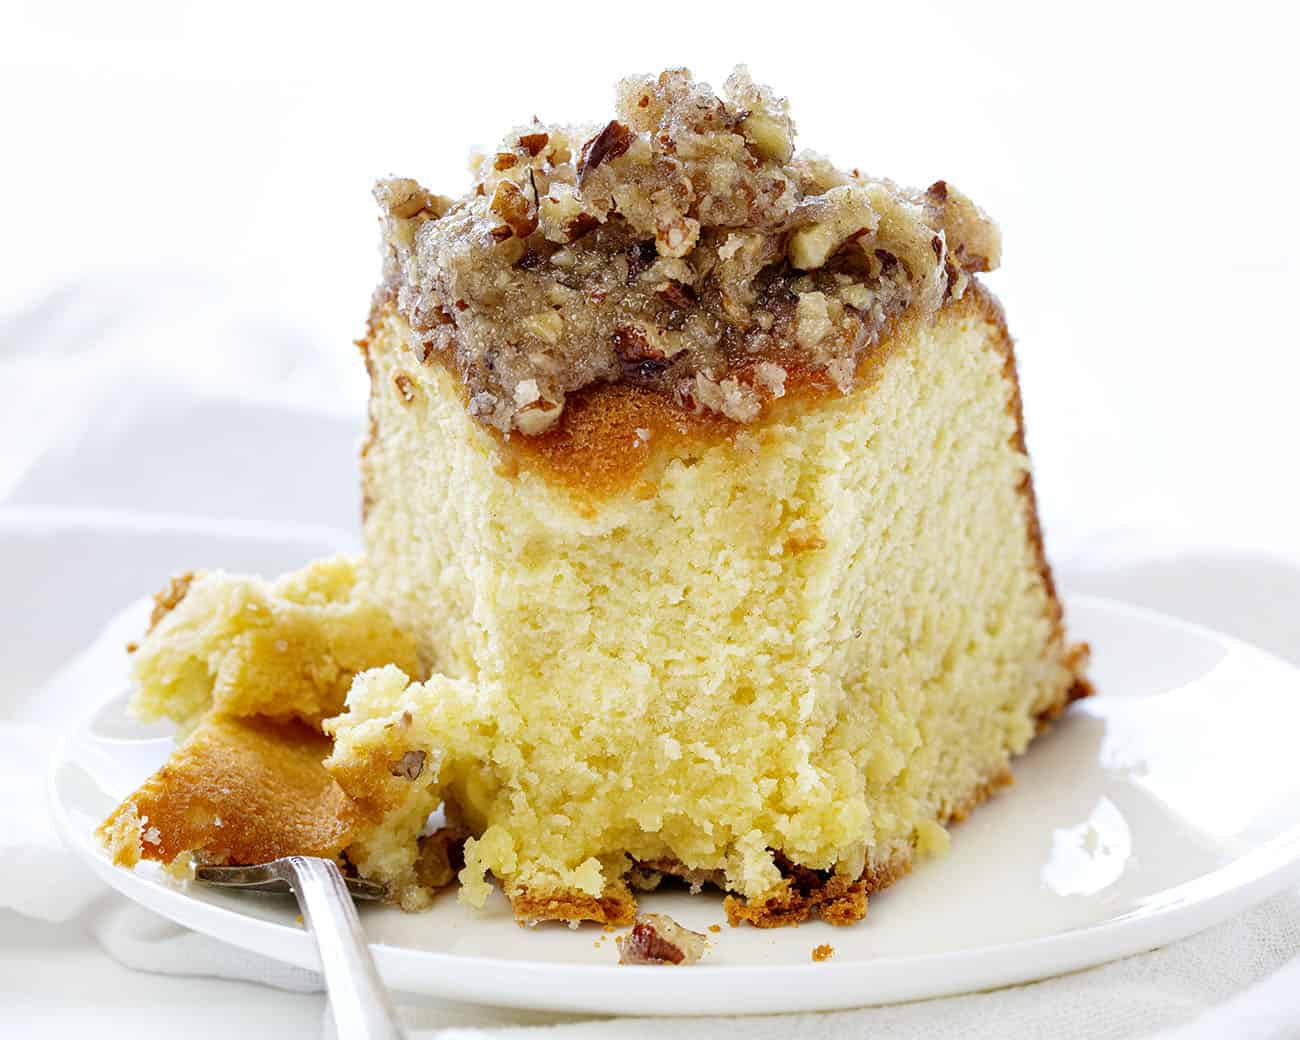 Slice of Kentucky Butter Crunch Cake with a Bite Removed